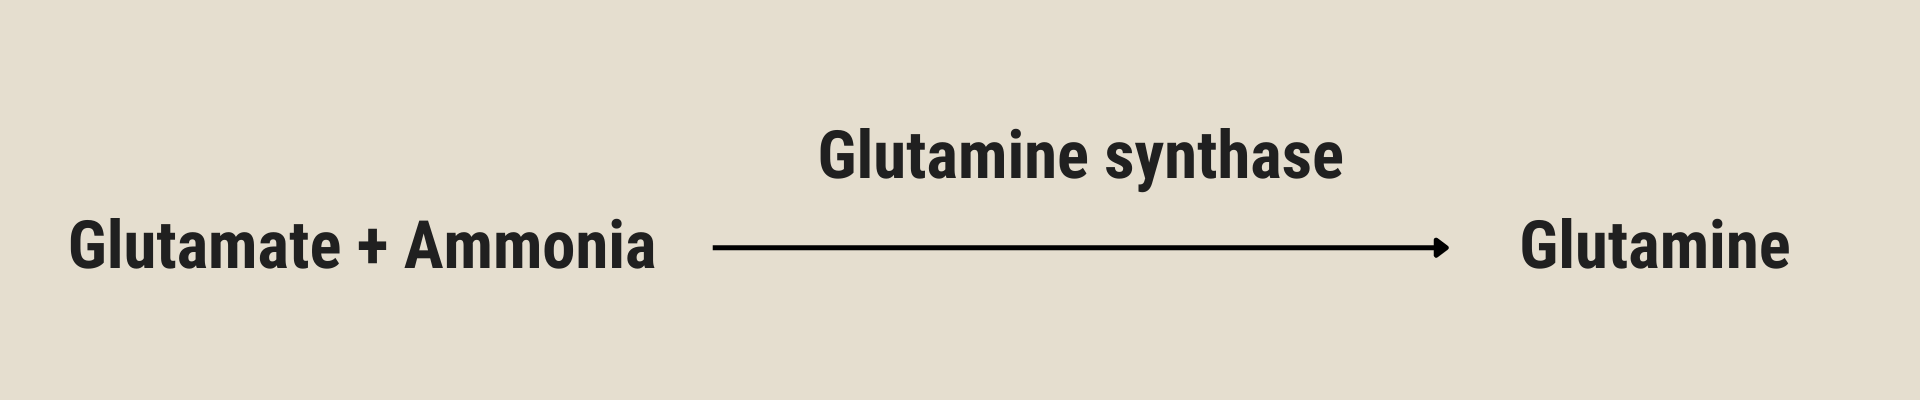 How glutamine forms